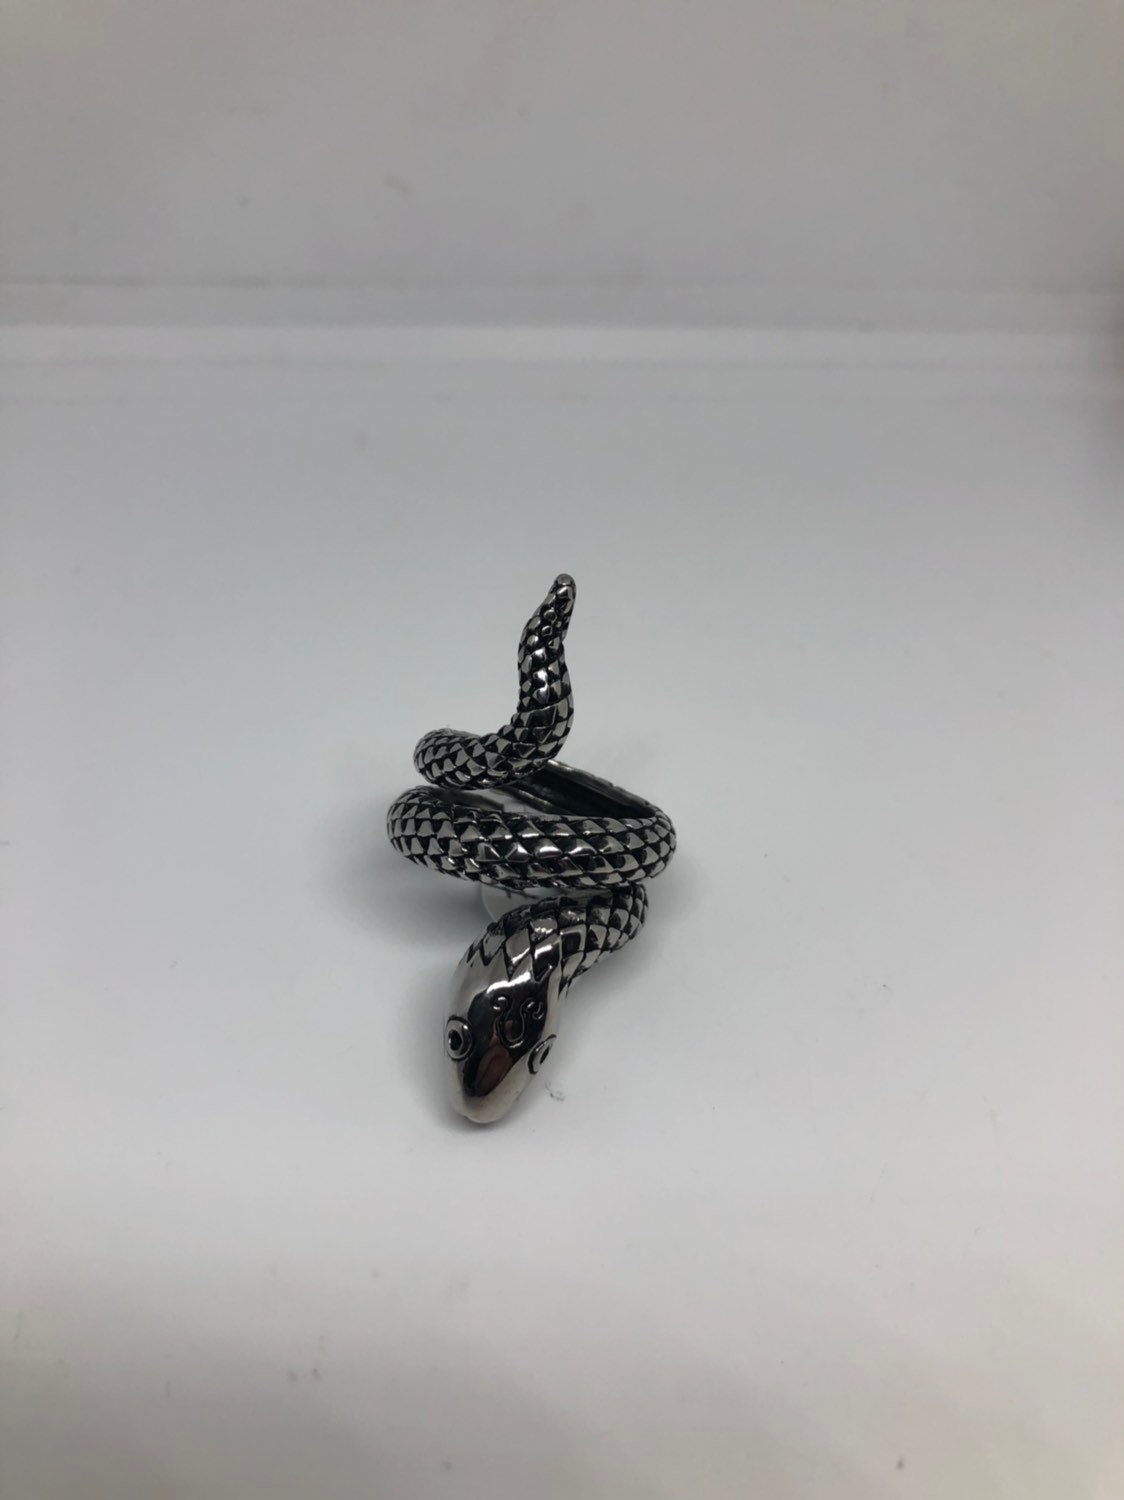 Vintage Gothic Silver Stainless Steel Snake Mens Ring